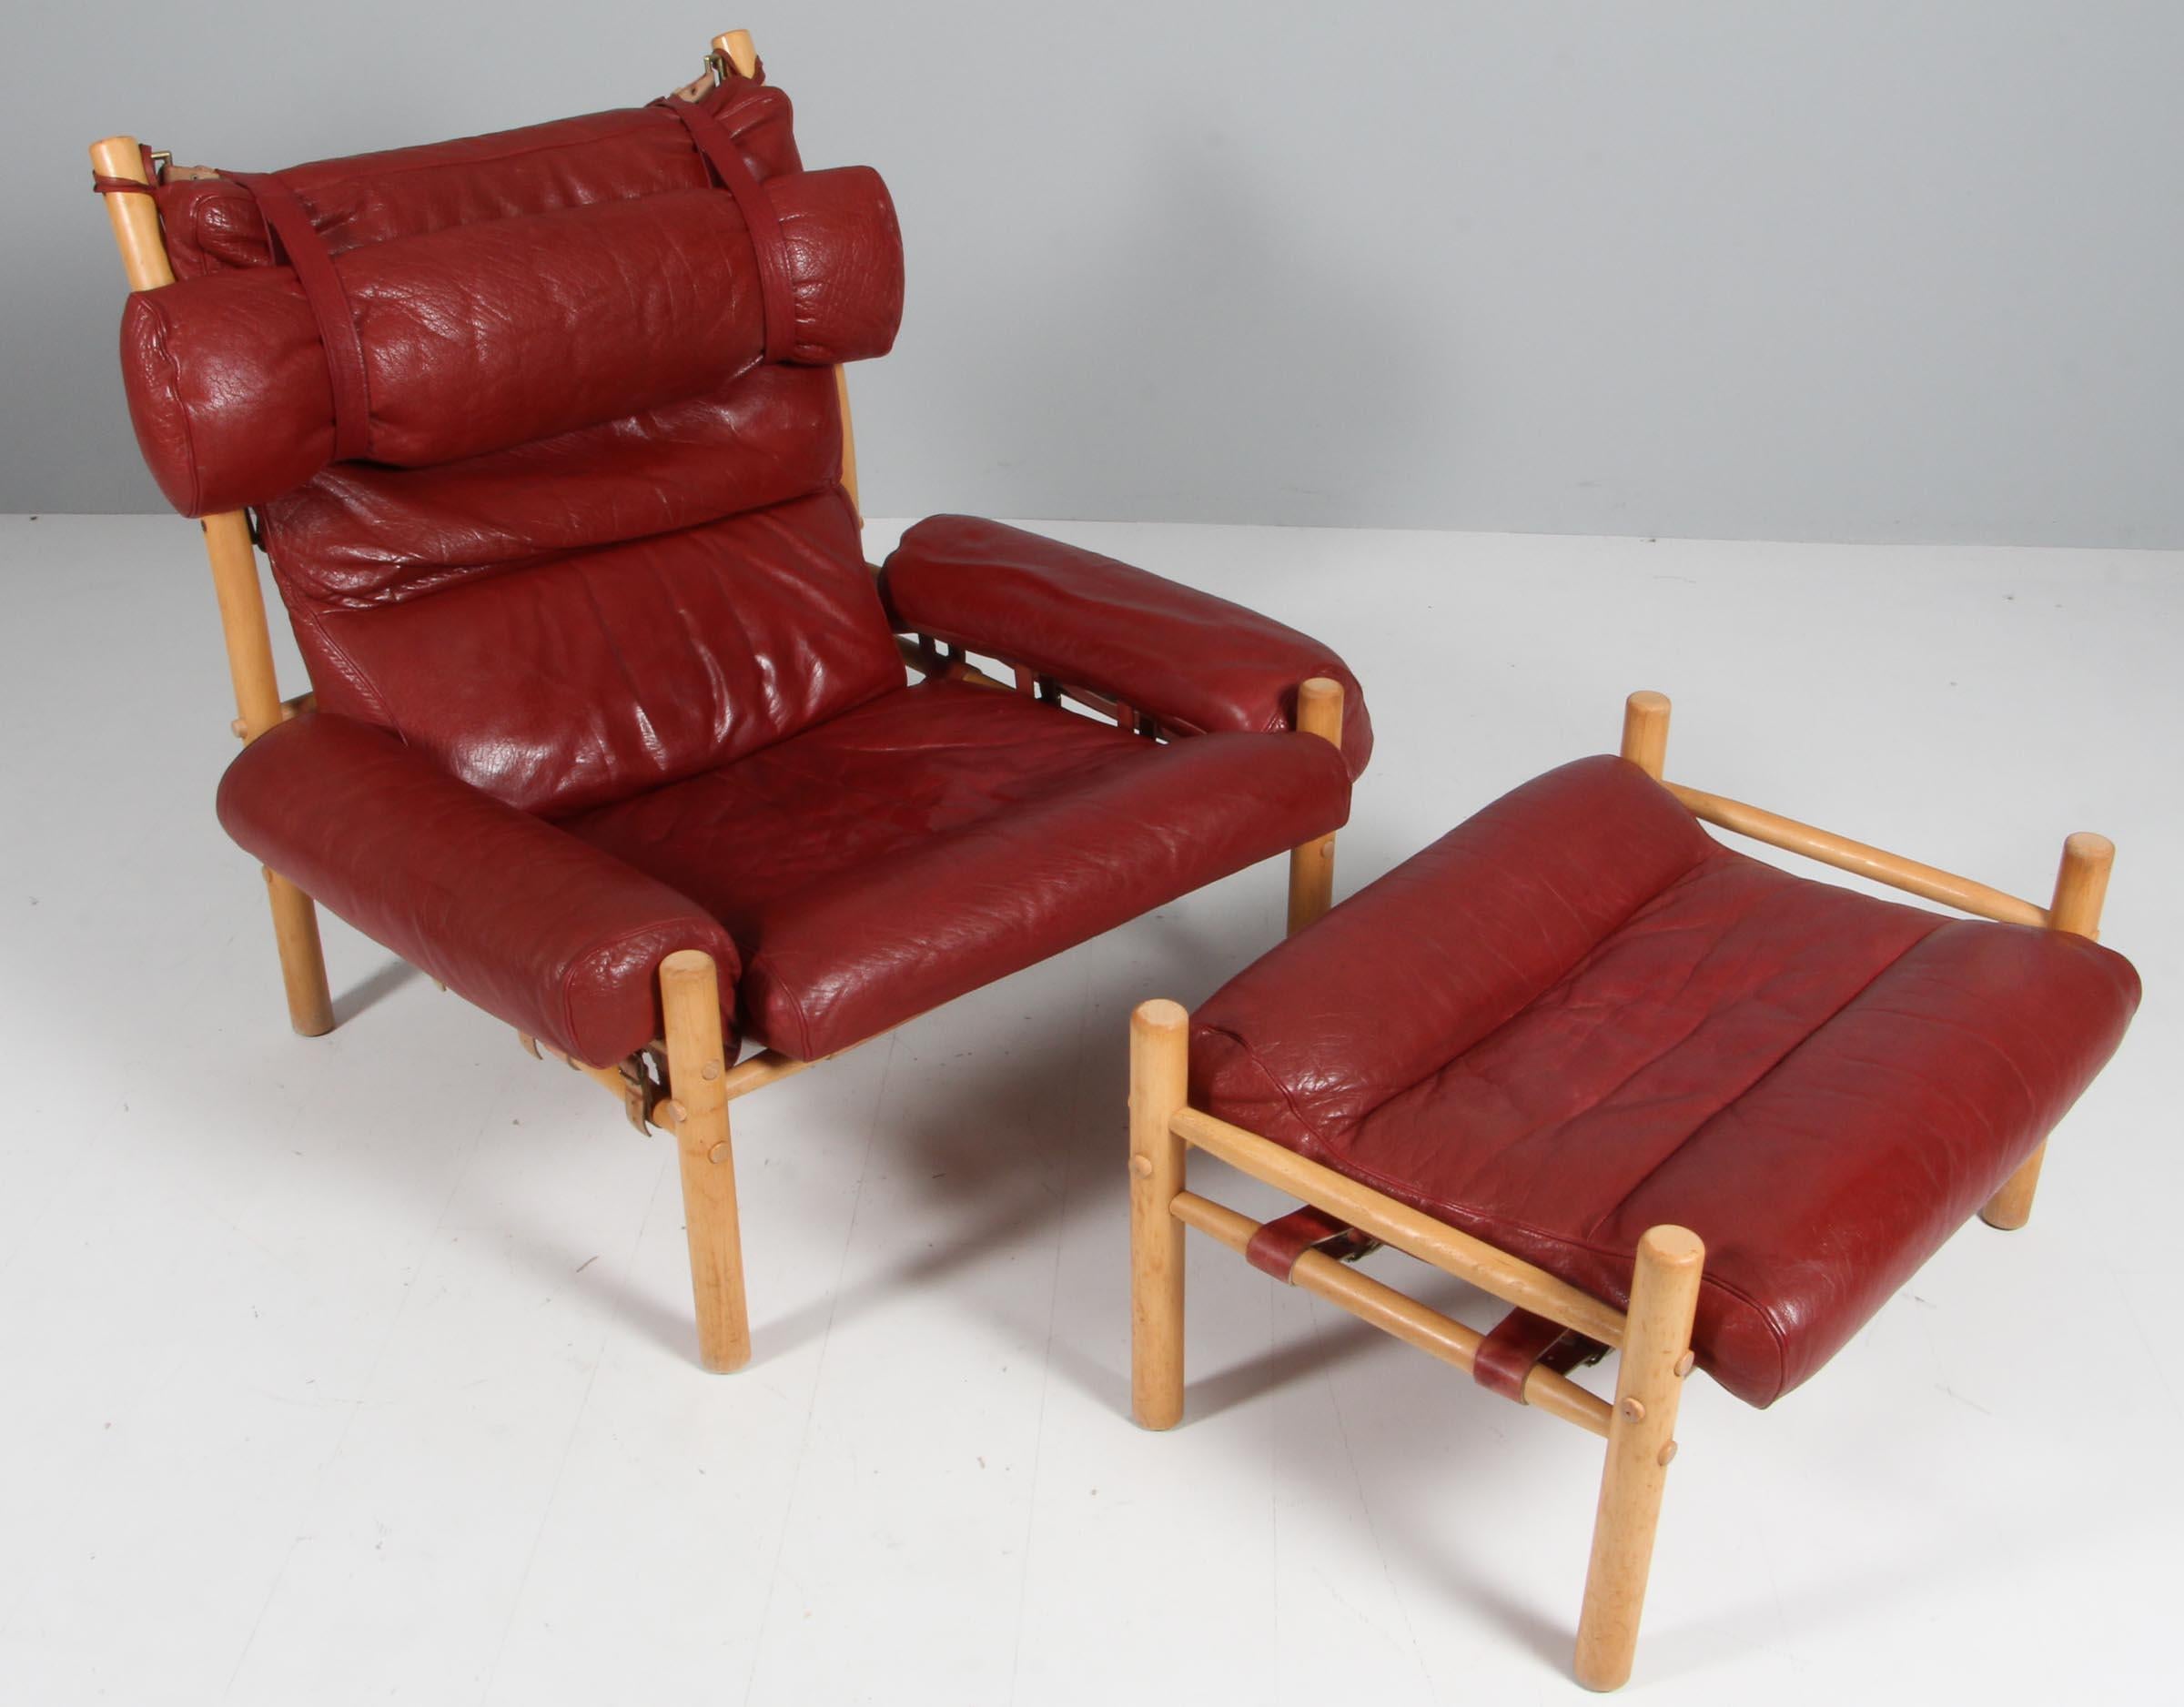 Arne Norell, 'Inca' lounge chair with ottoman, leather, beech, Sweden, 1965.

The iconic 'Inca' lounge chair with ottoman in original red leather, designed by Arne Norell. The back features thick buffalo leather. The red peather leather on the back